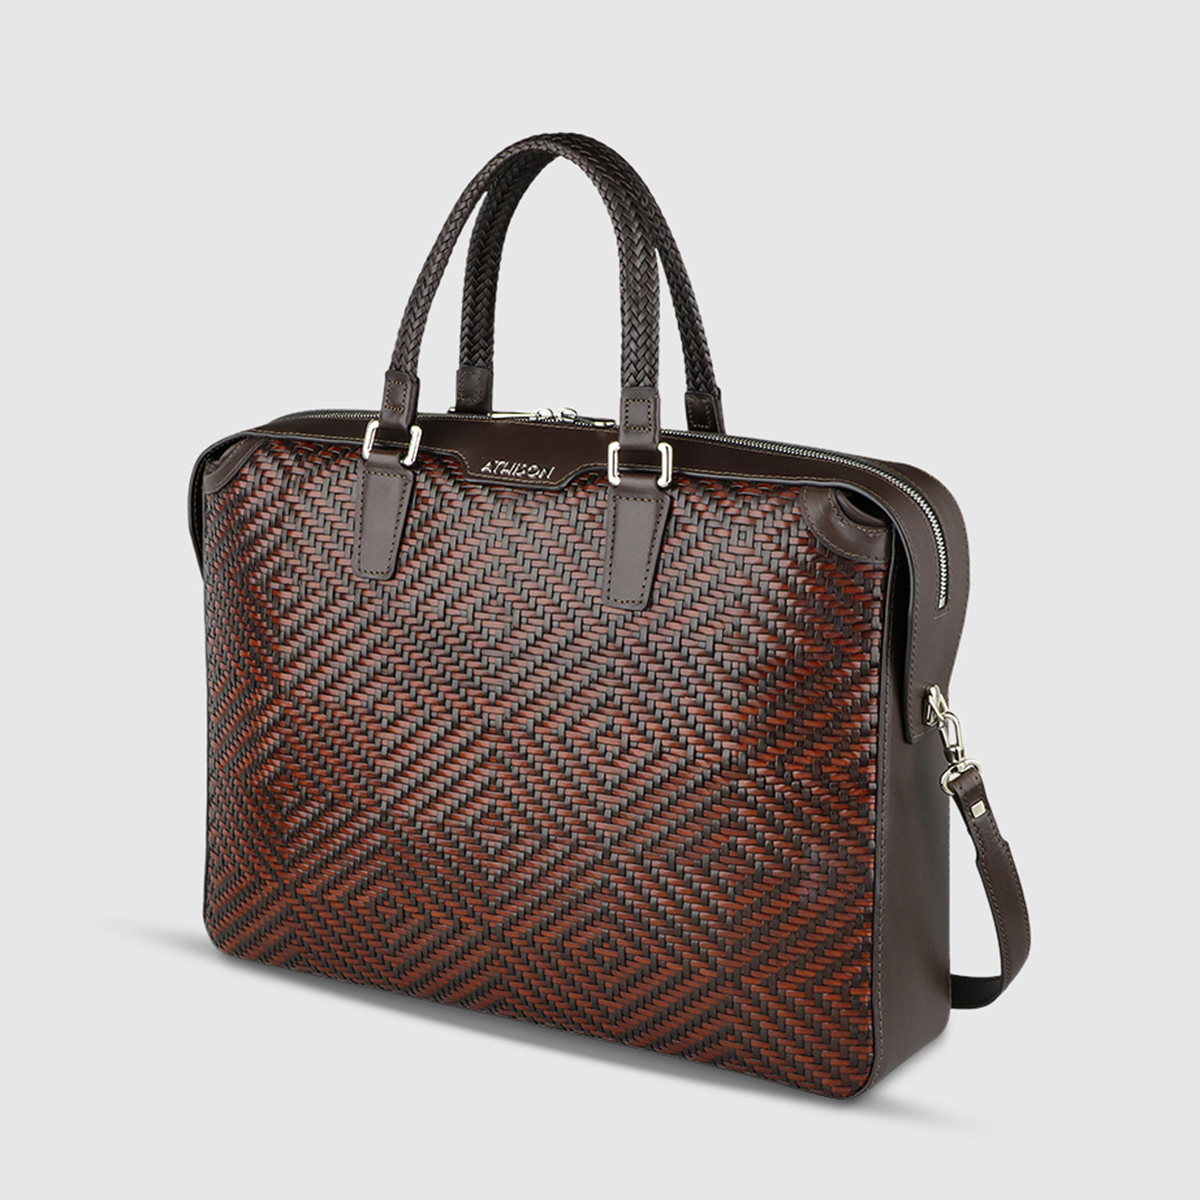 Athison Brown Leather Bag Athison on sale 2022 2